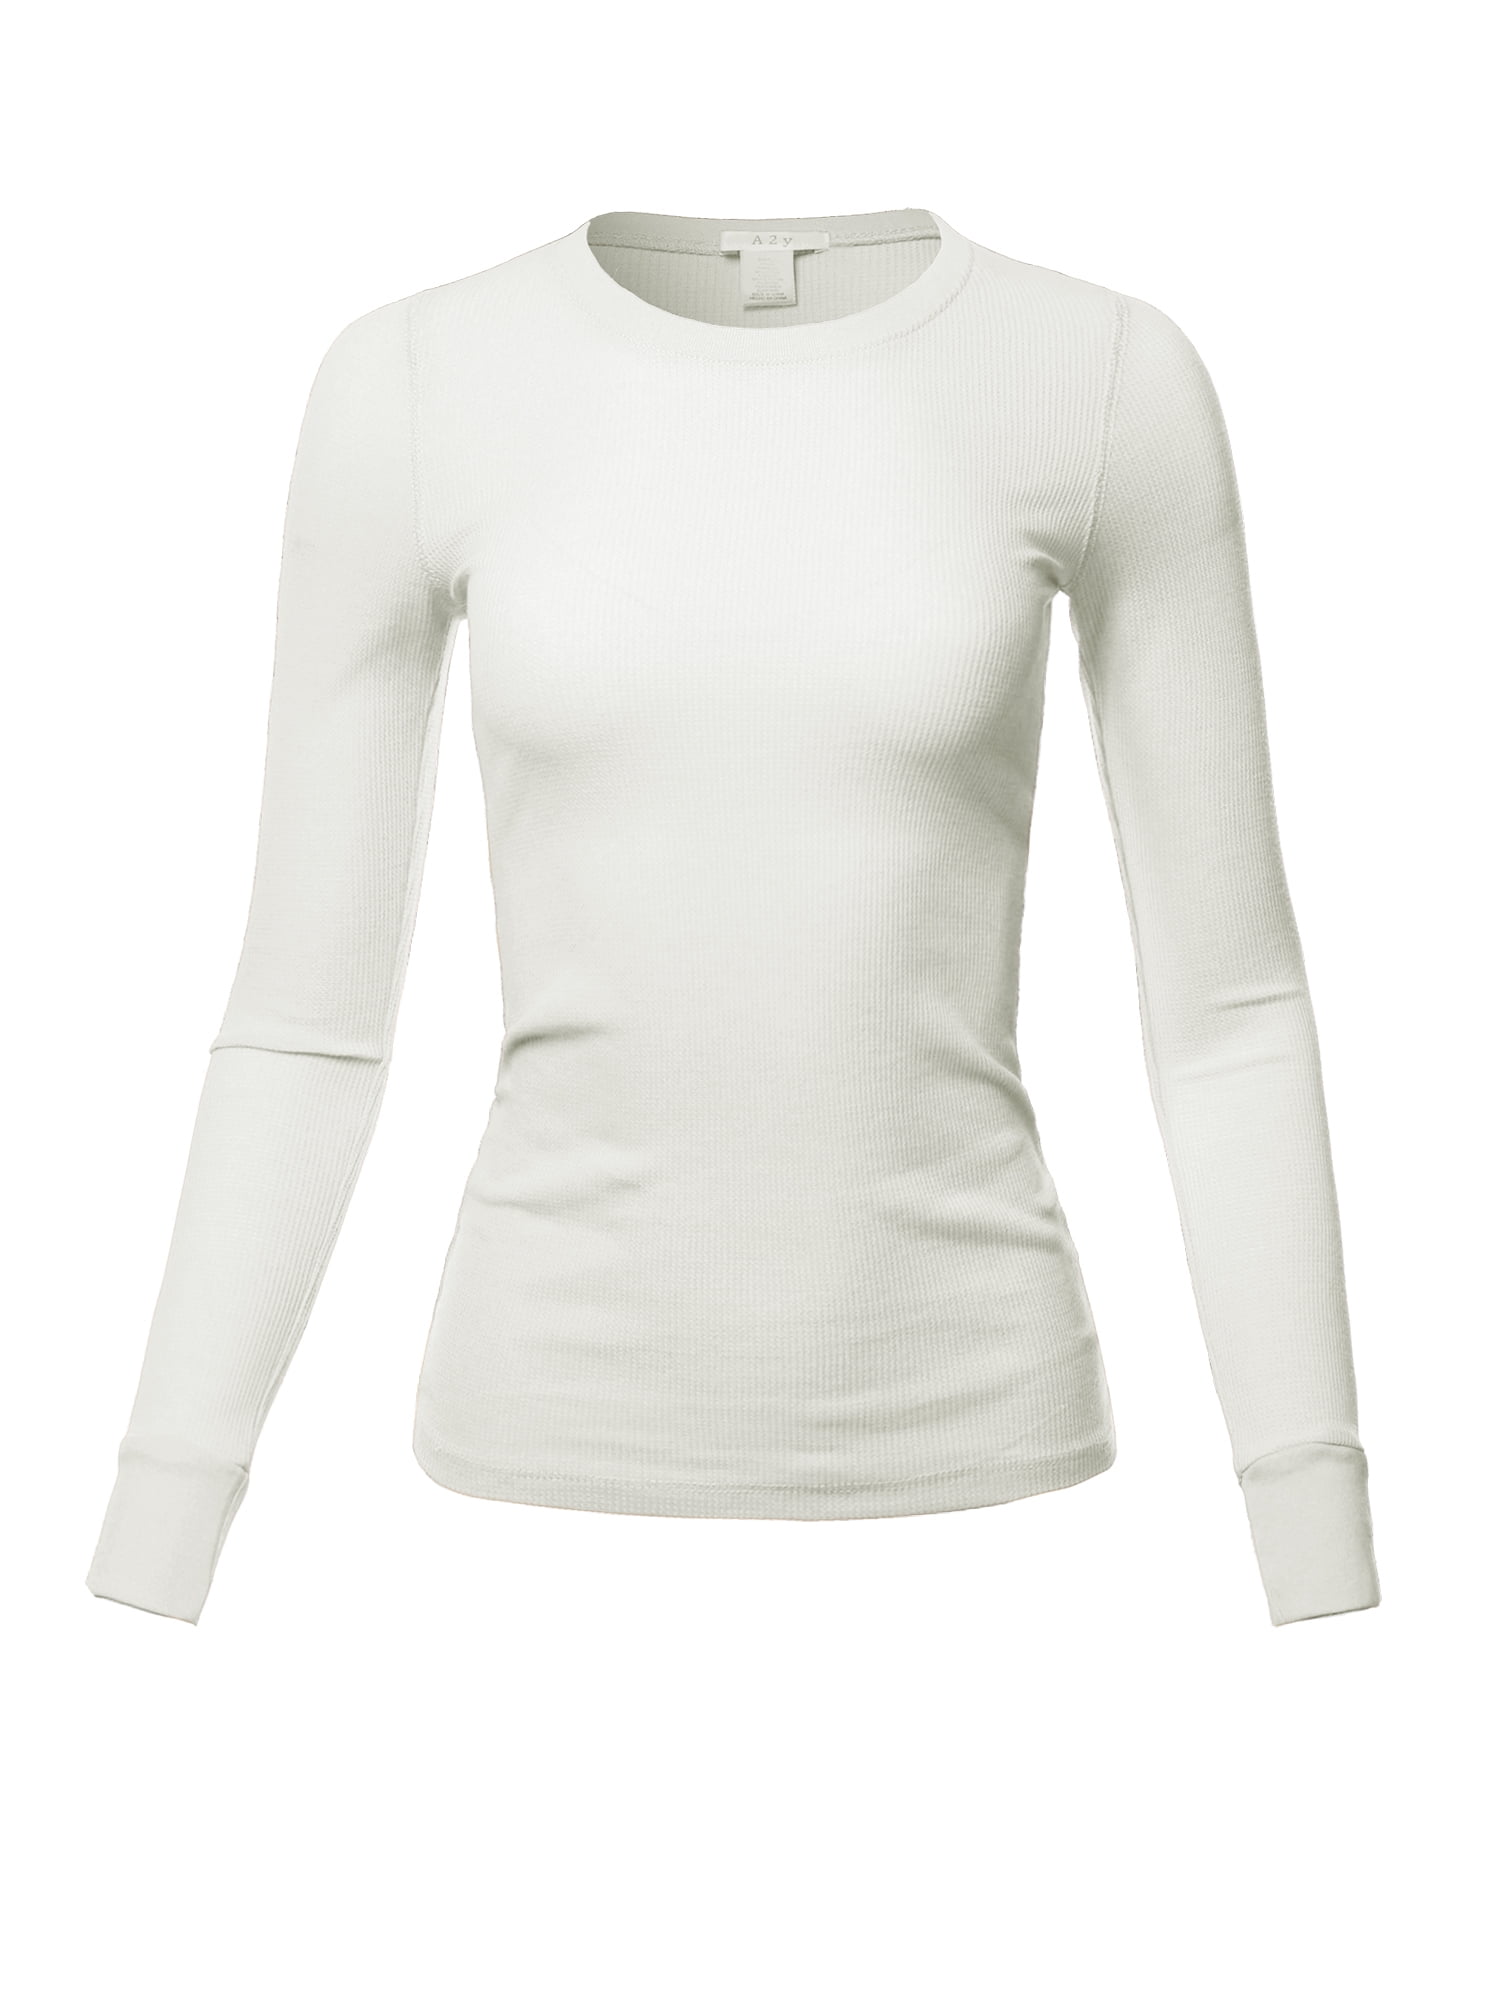 A2Y - A2Y Women's Basic Solid Fitted Long Sleeve Crew Neck Thermal Top